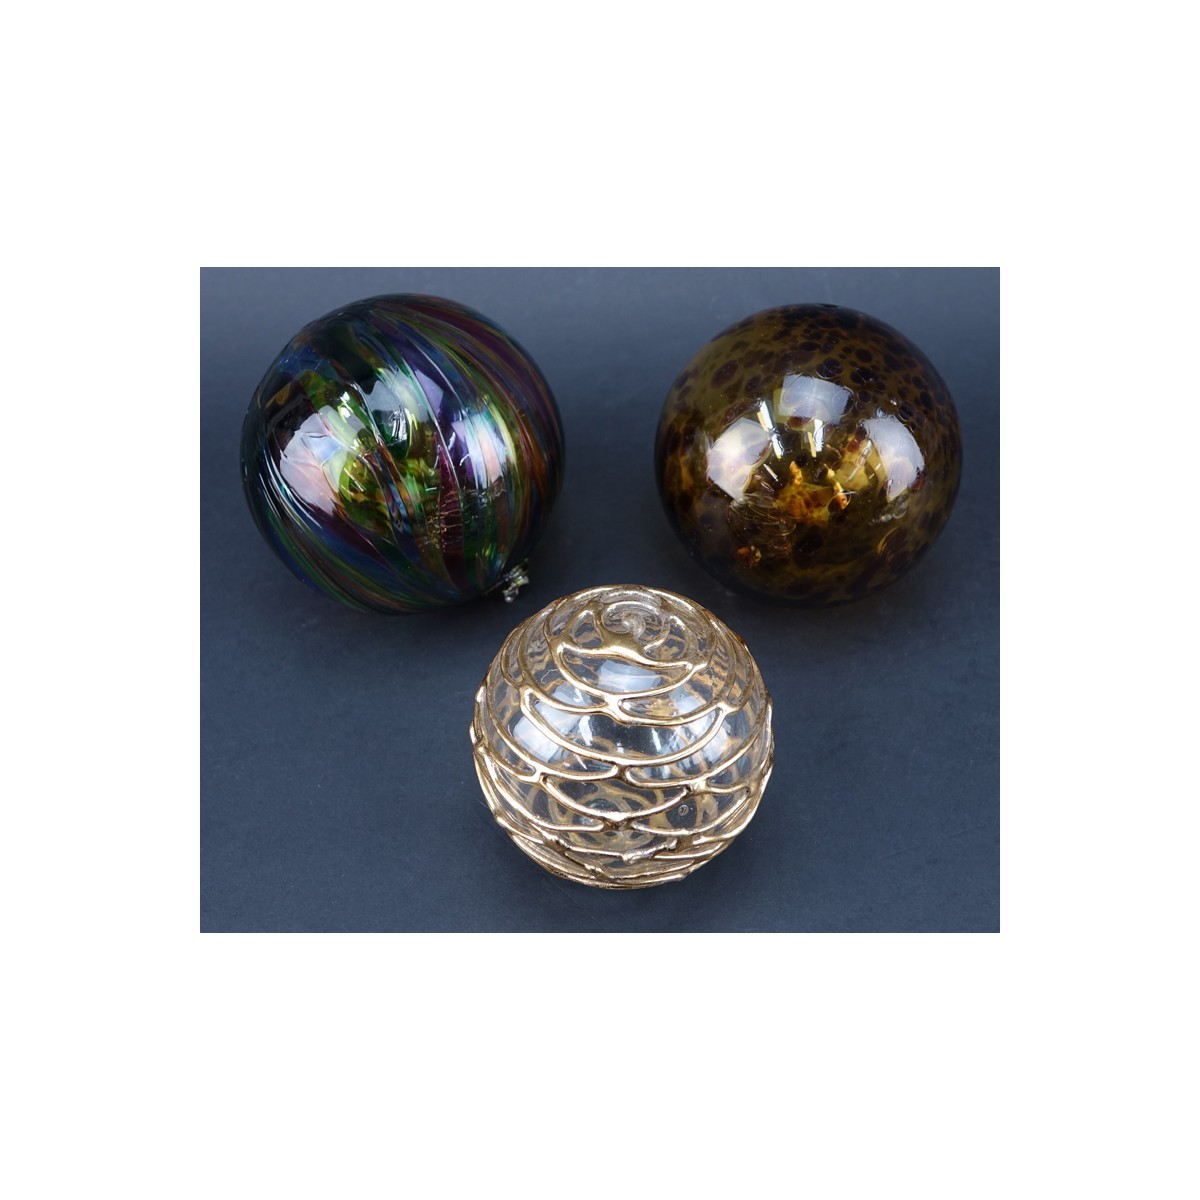 Group of Nine (9): Six Vintage Glass Paperweights along with Three Art Glass Spheres. Label attached to a few paperweights, spheres are unsigned.